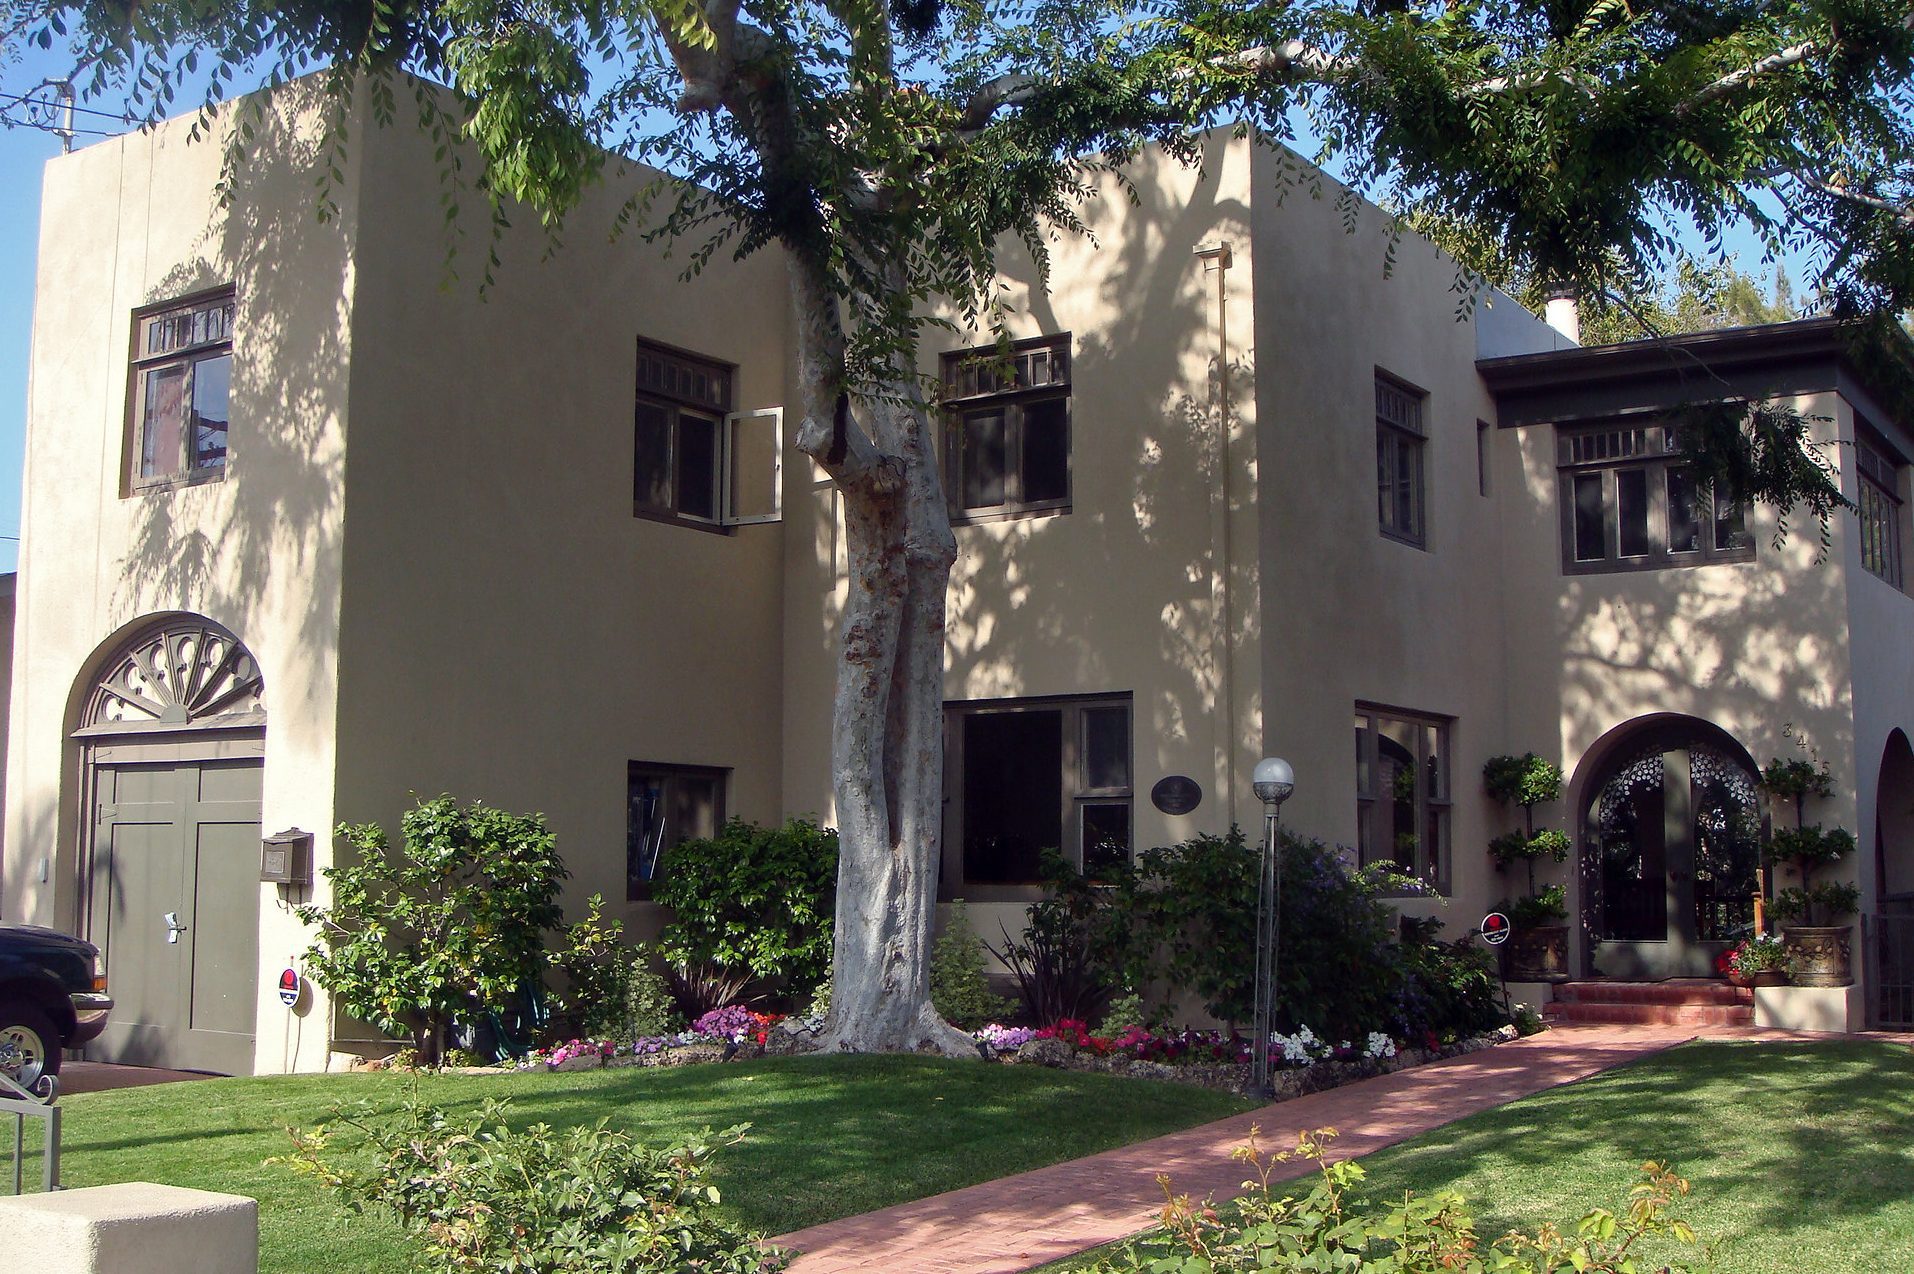 Katherine Teats House, a historic landmark, in San Diego. Expedia Group and Unite Here Local 30 reached a tentative agreement on how to regulate vacation rentals in the city.